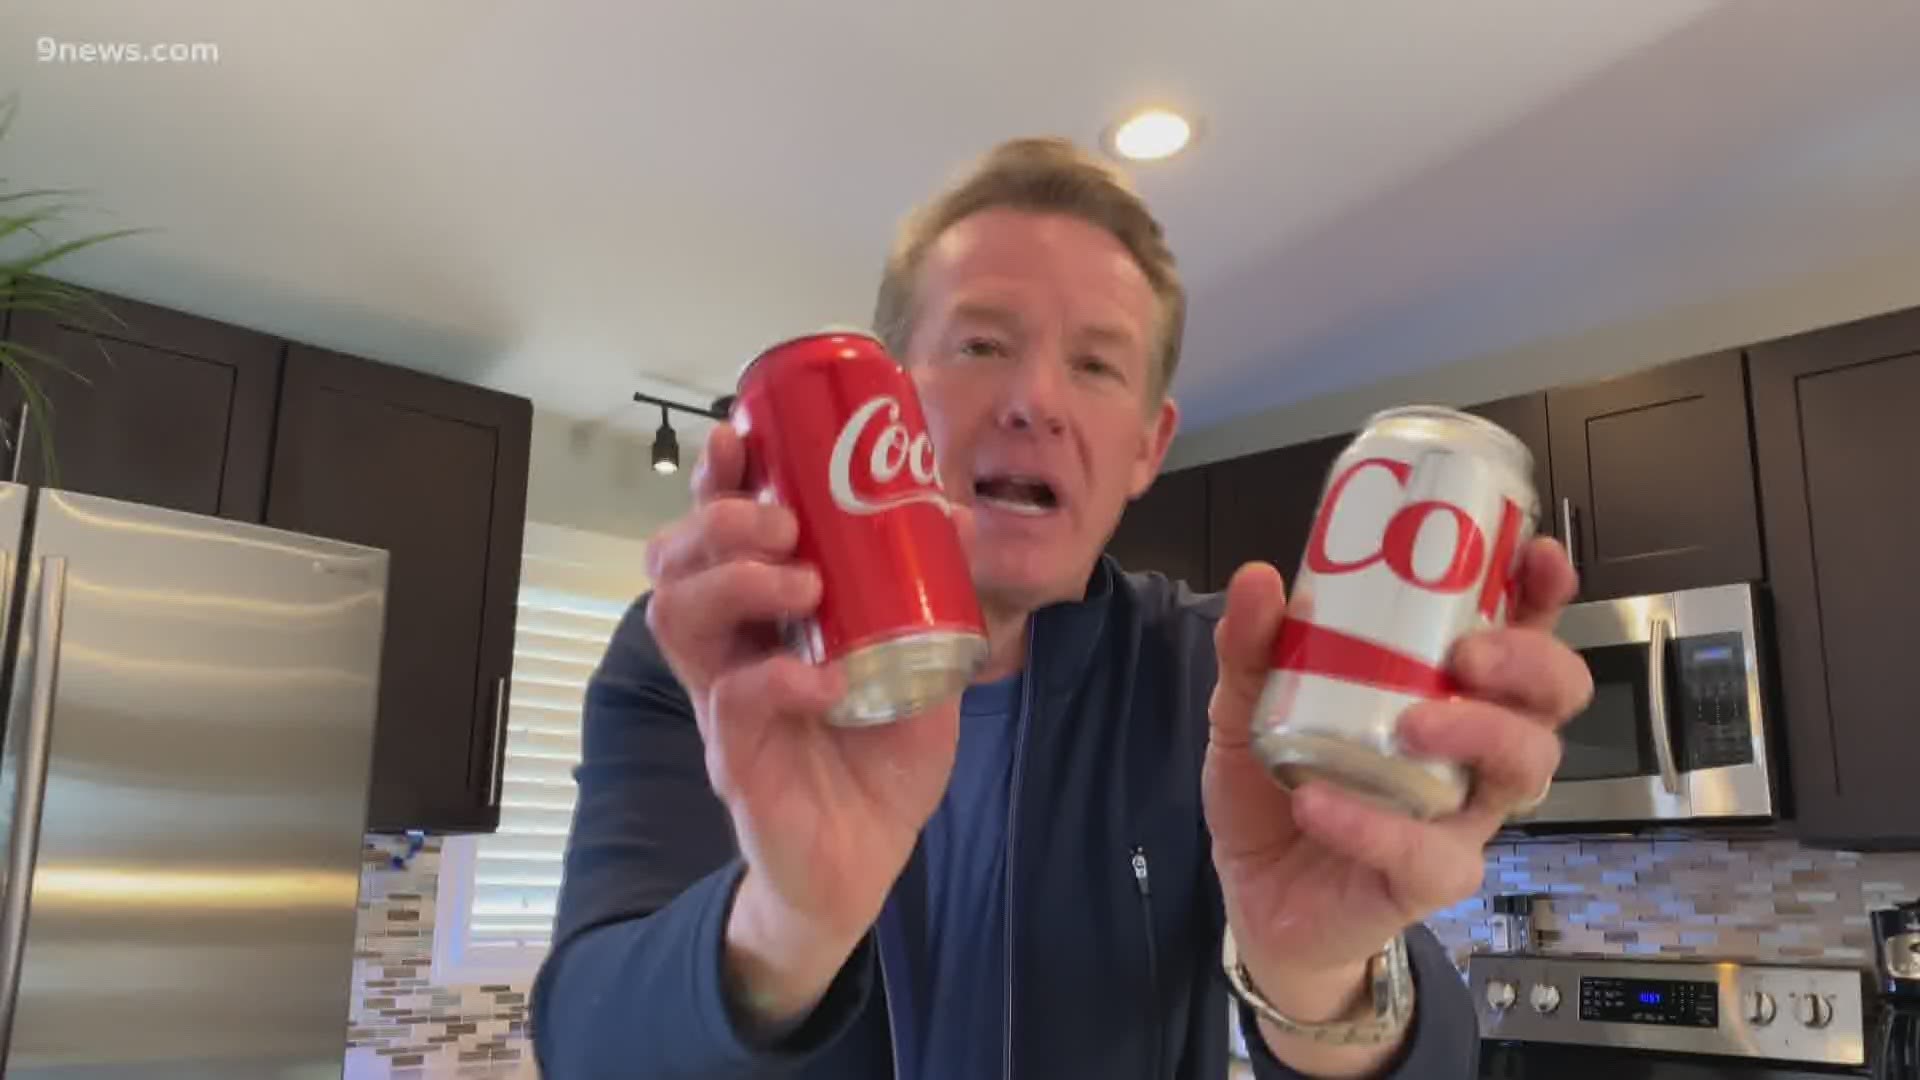 Try this easy experiment with soda!